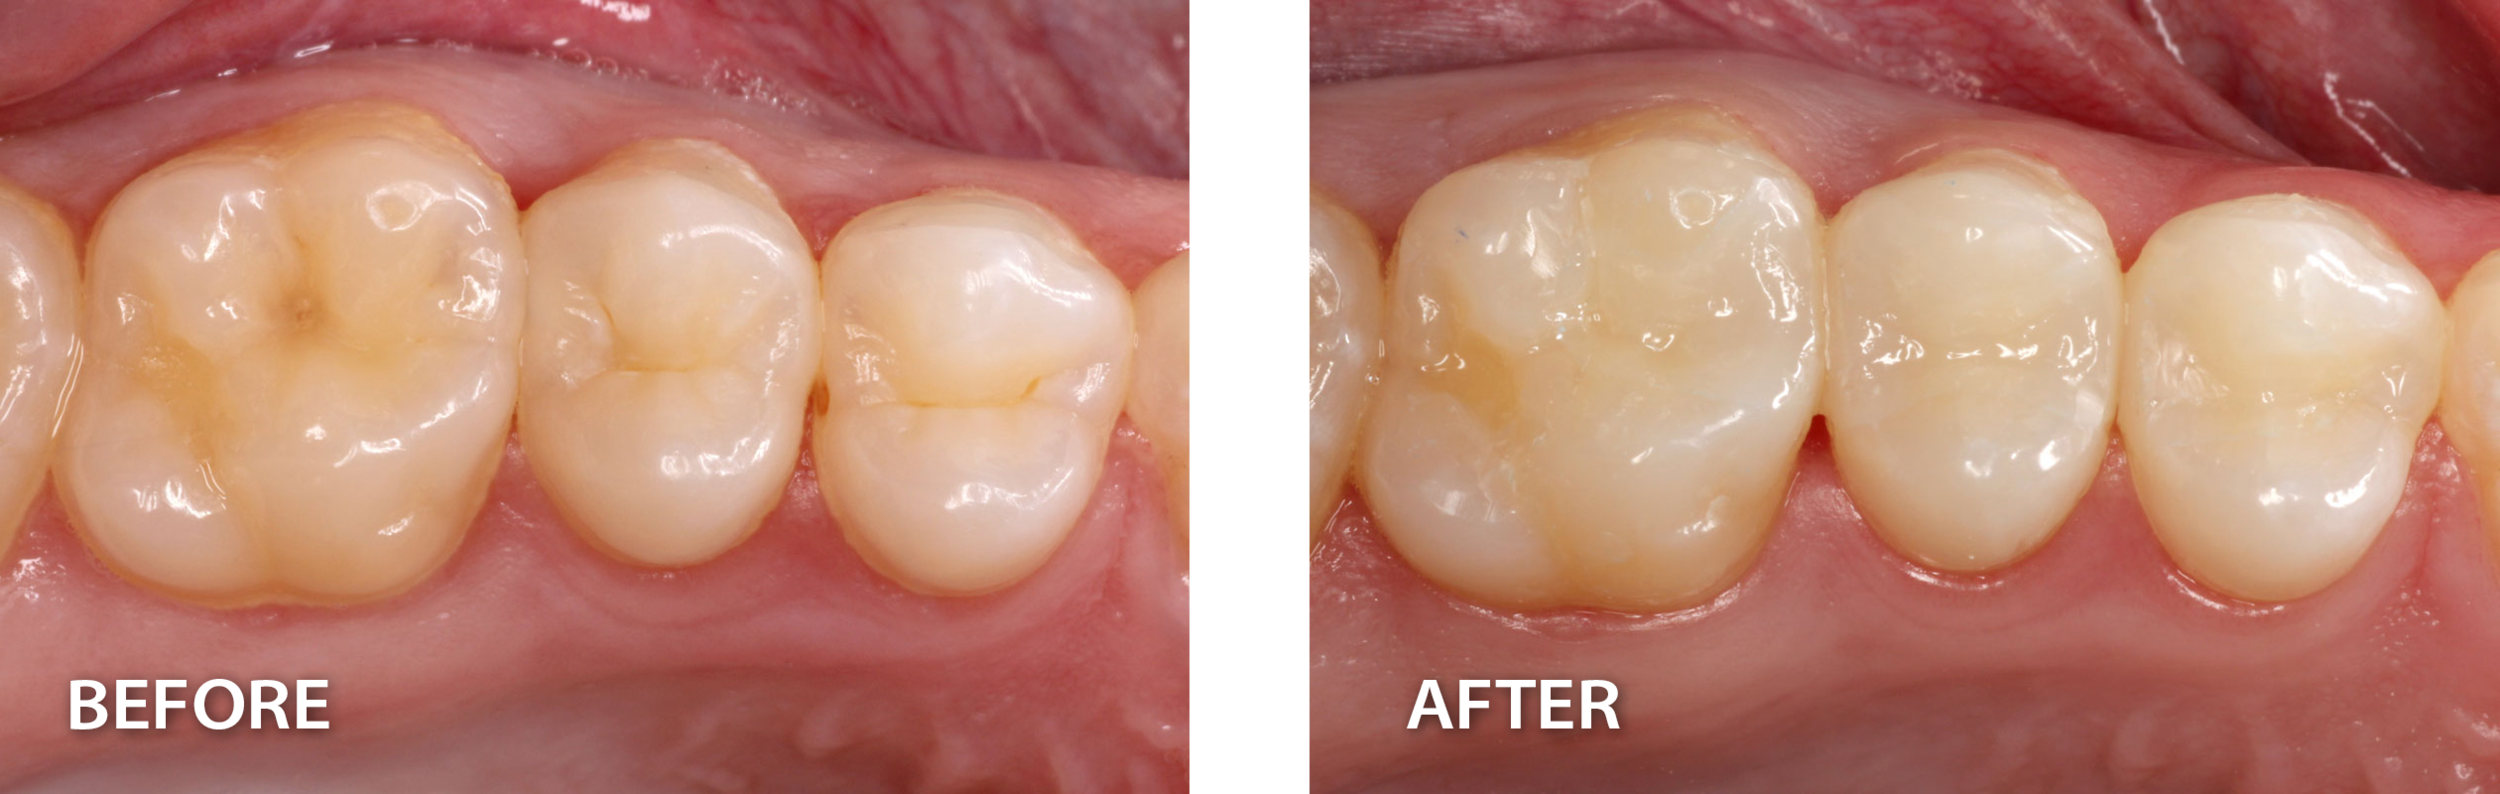  side by side images of teeth before and after direct adhesive dental procedure 